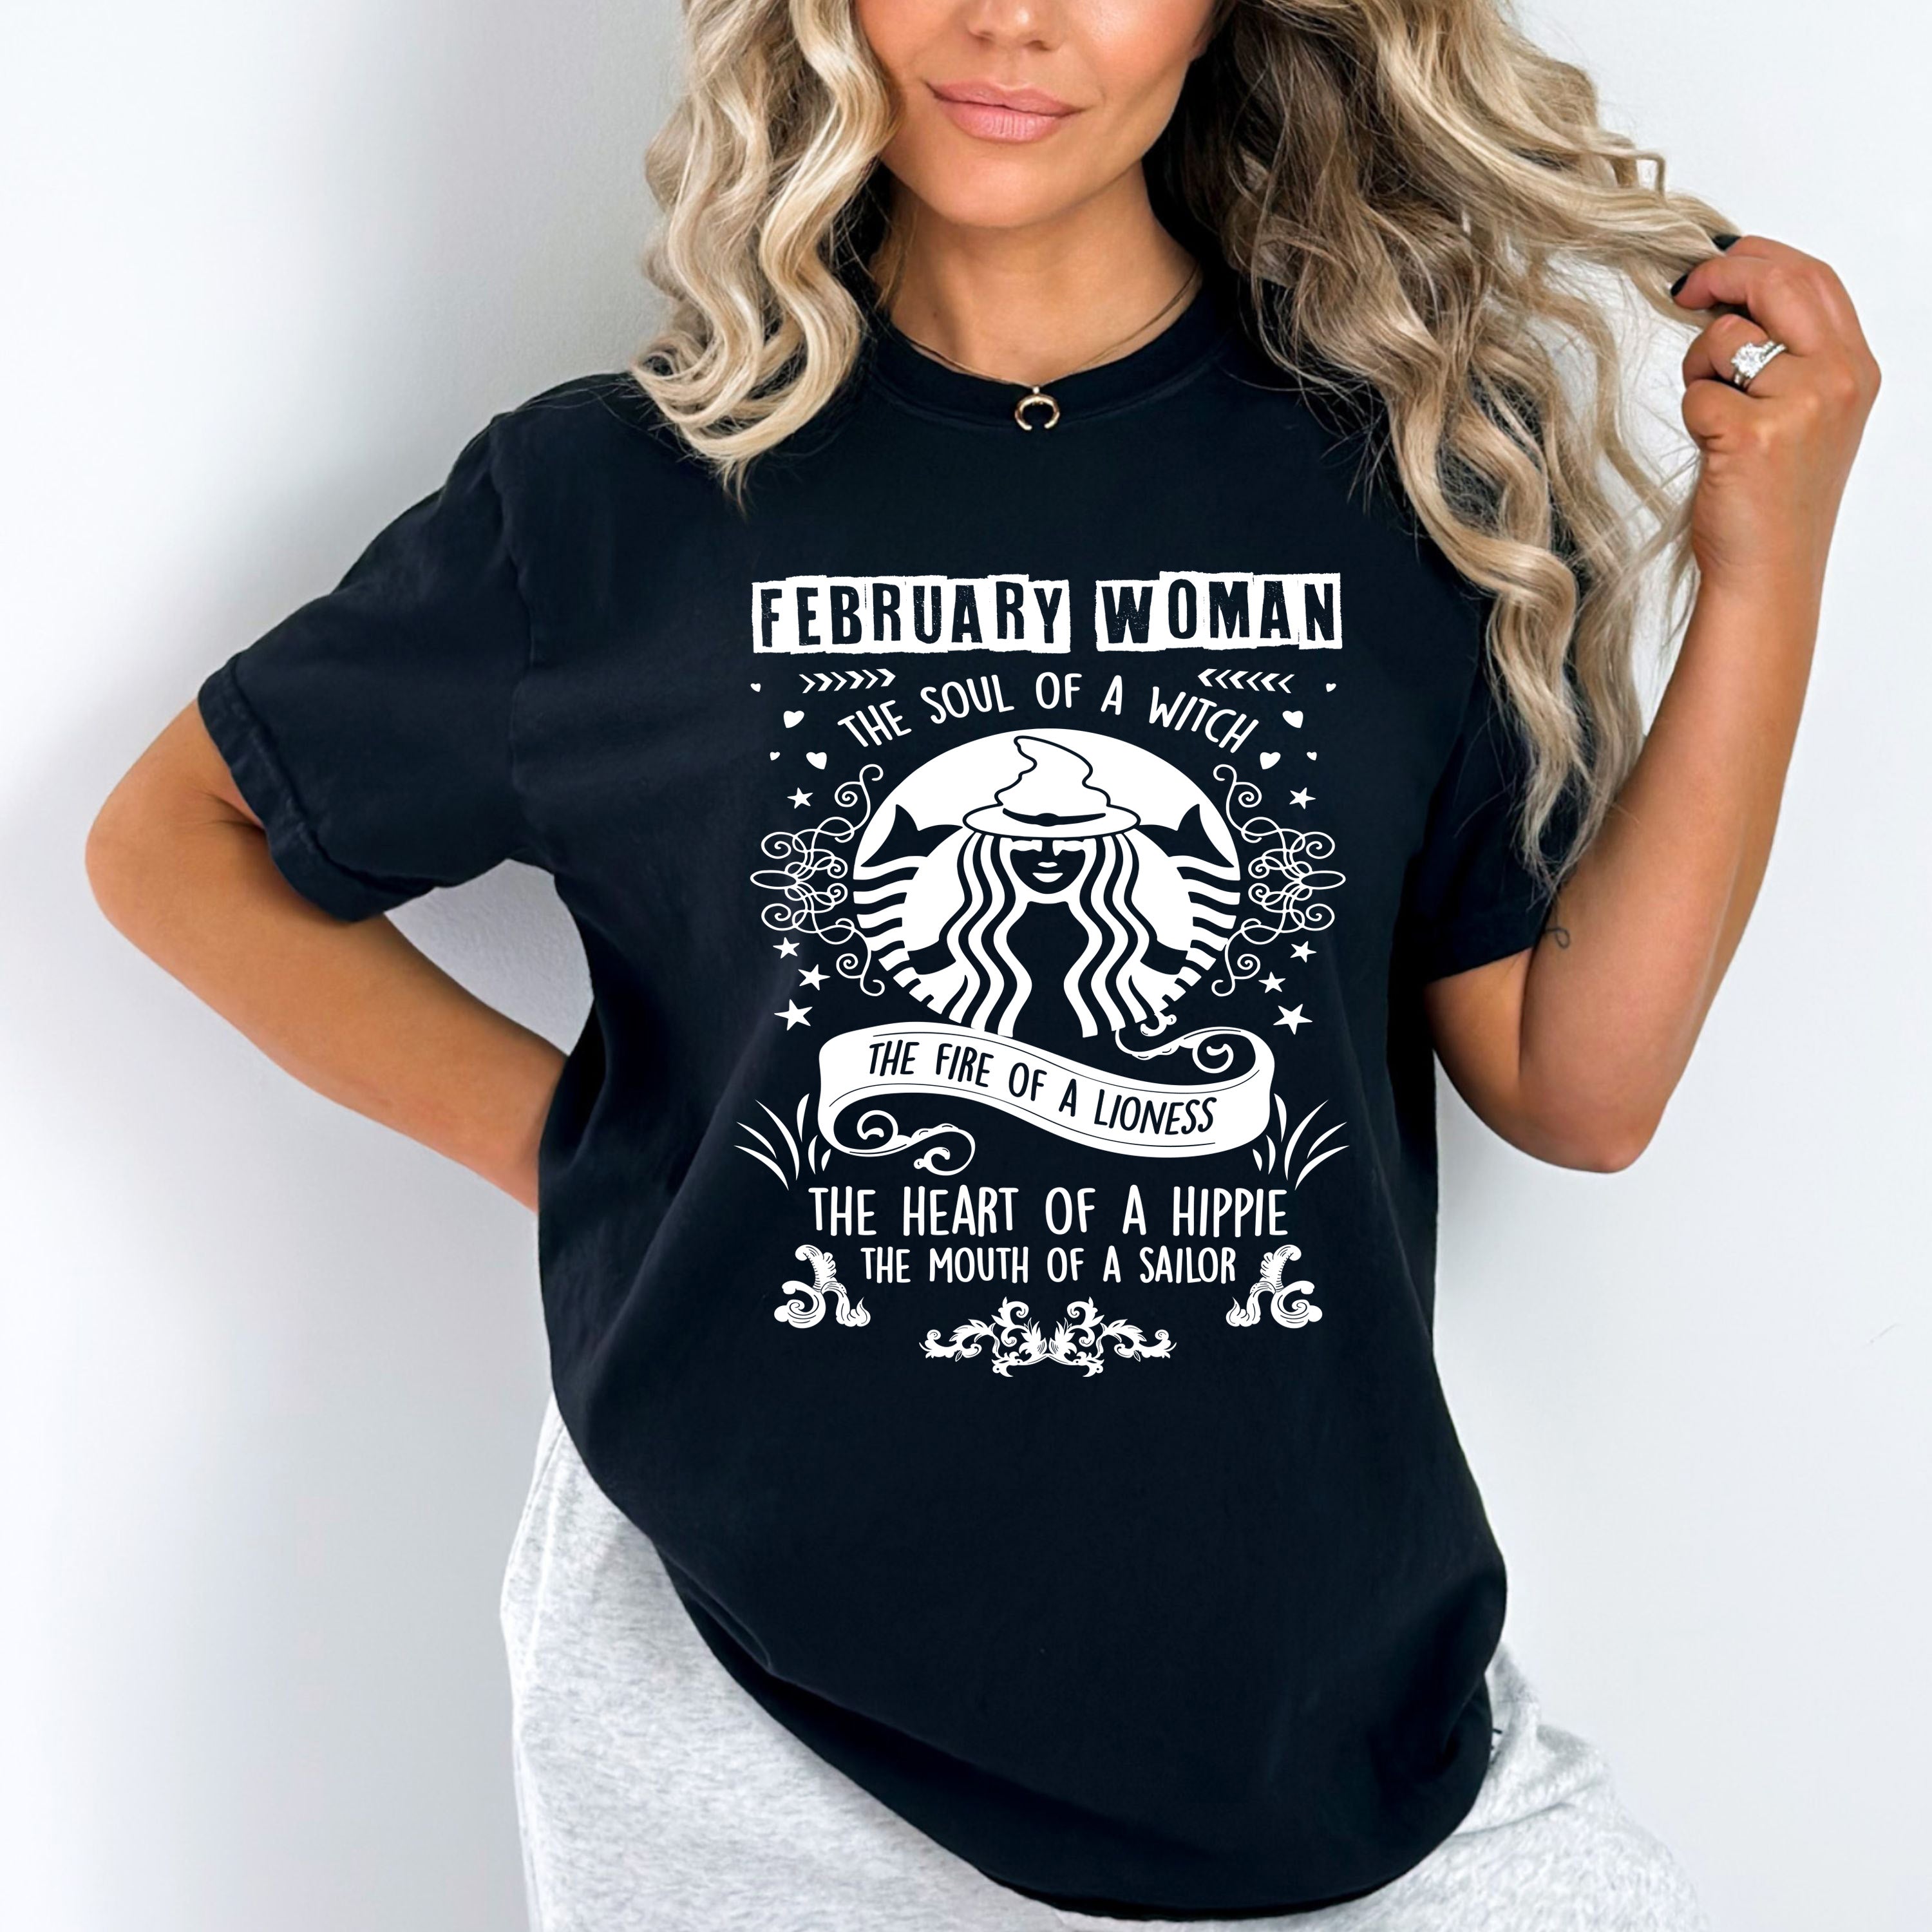 "FEBRUARY WOMAN The Soul Of A Witch The Fire Of A Lioness The Heart Of A Hippie...",T-Shirt.